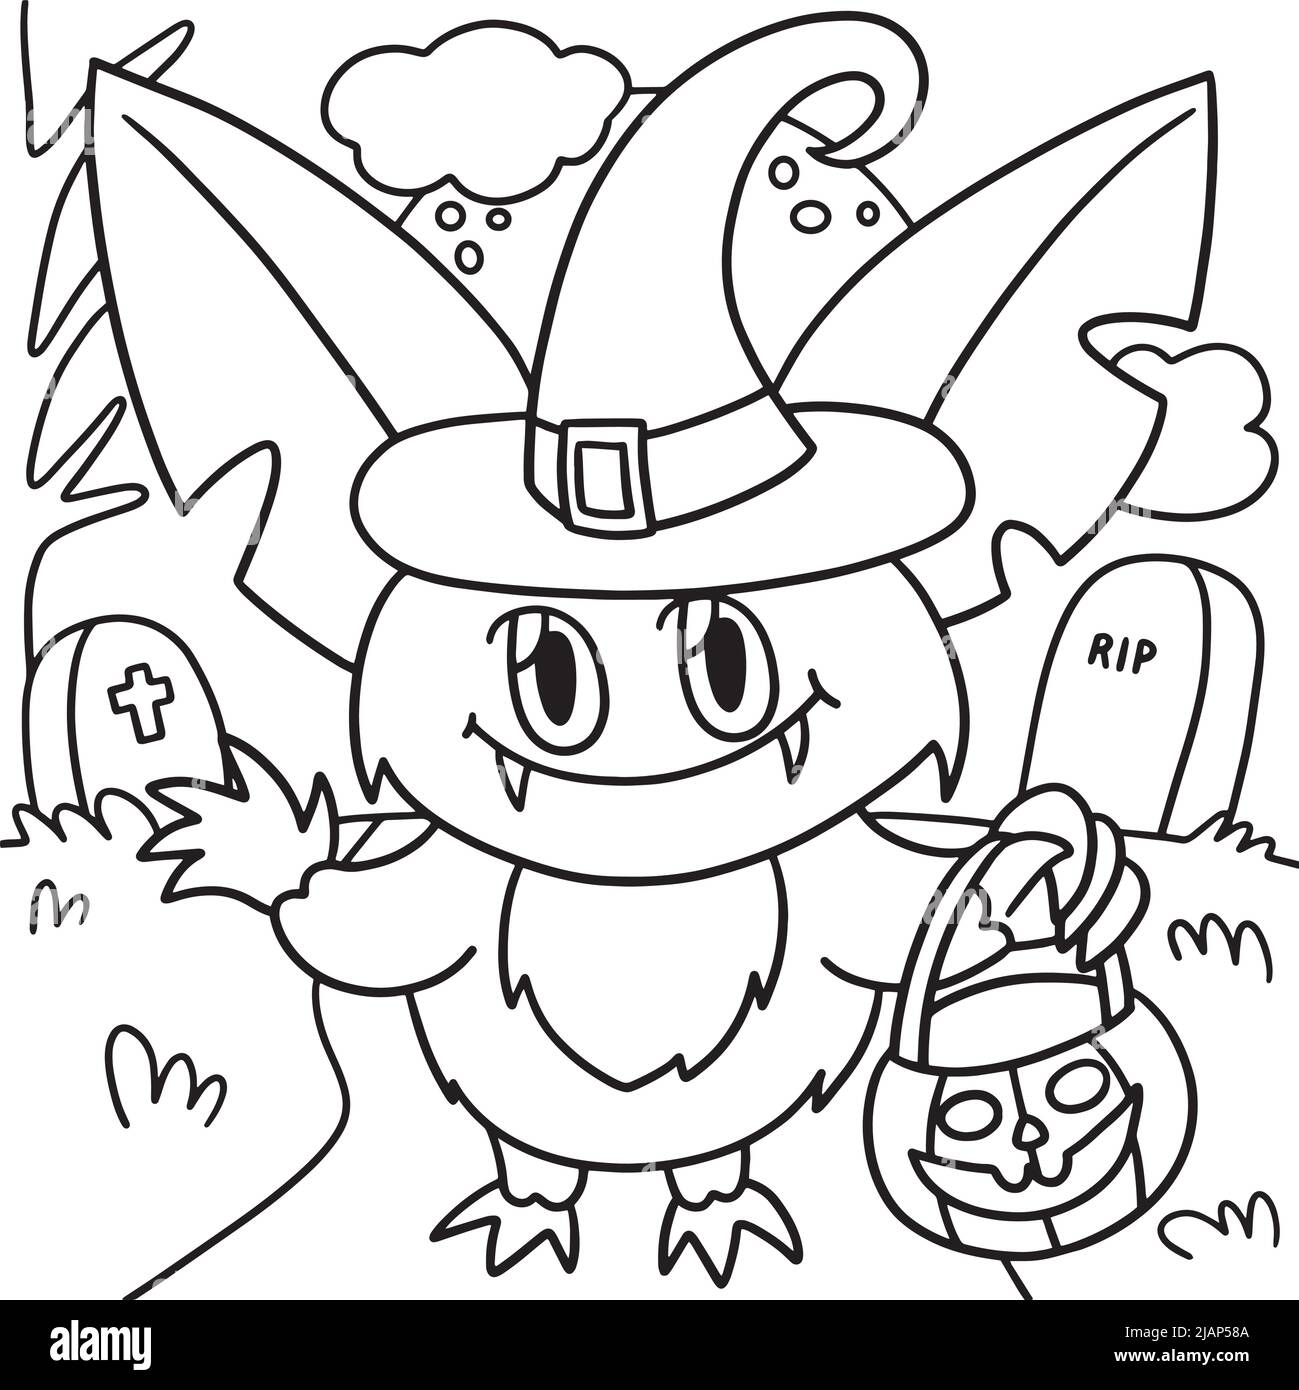 Halloween Vampire Owl Coloring Page for Kids Stock Vector